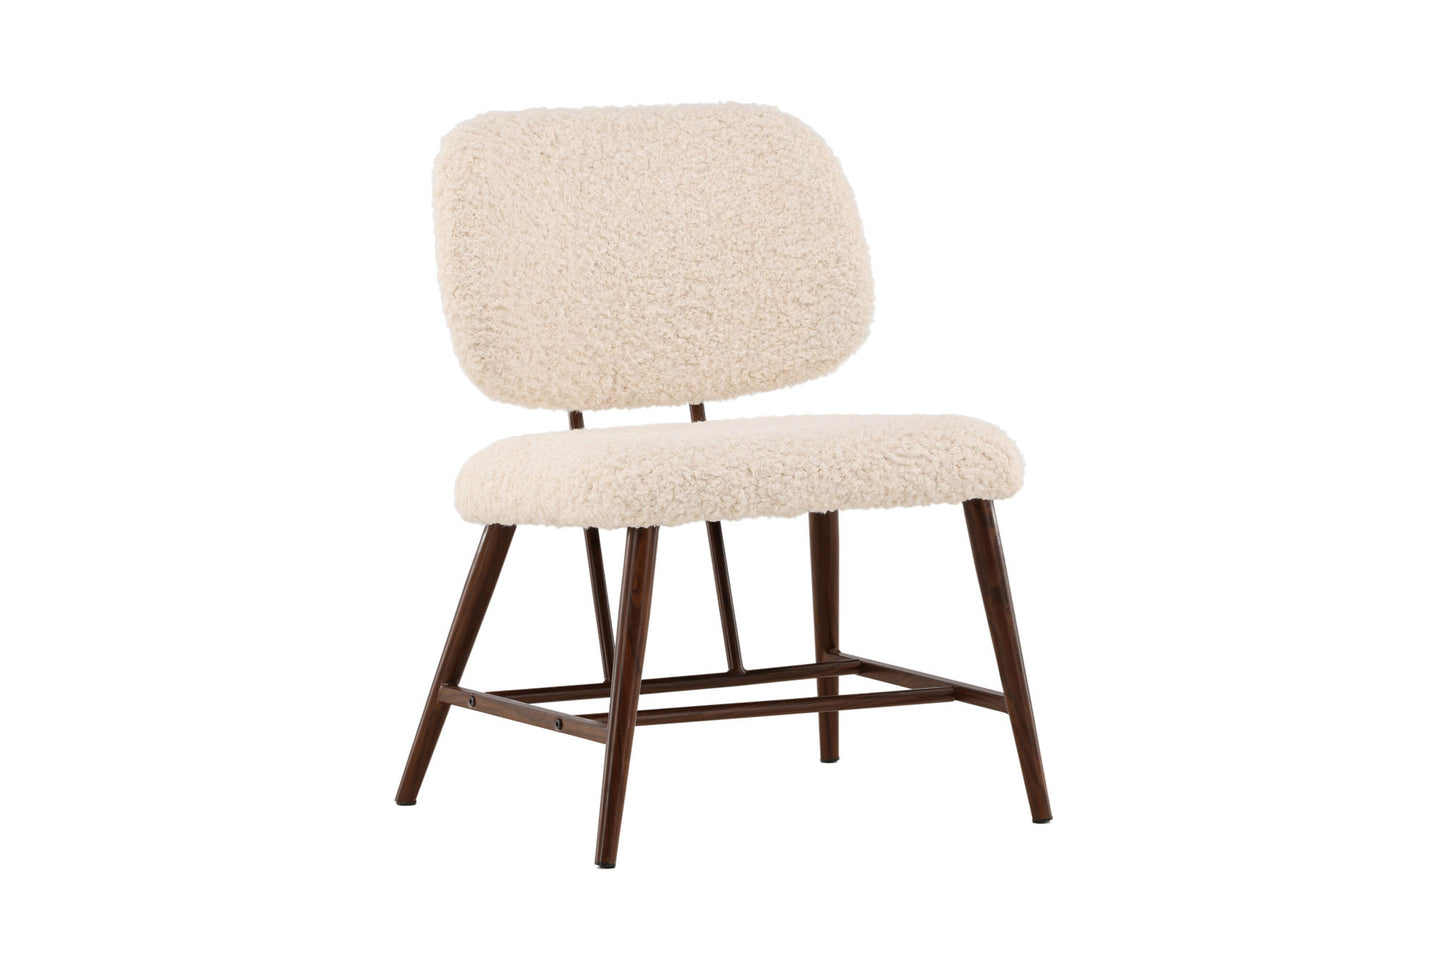 Midland fauteuil creme wit teddy